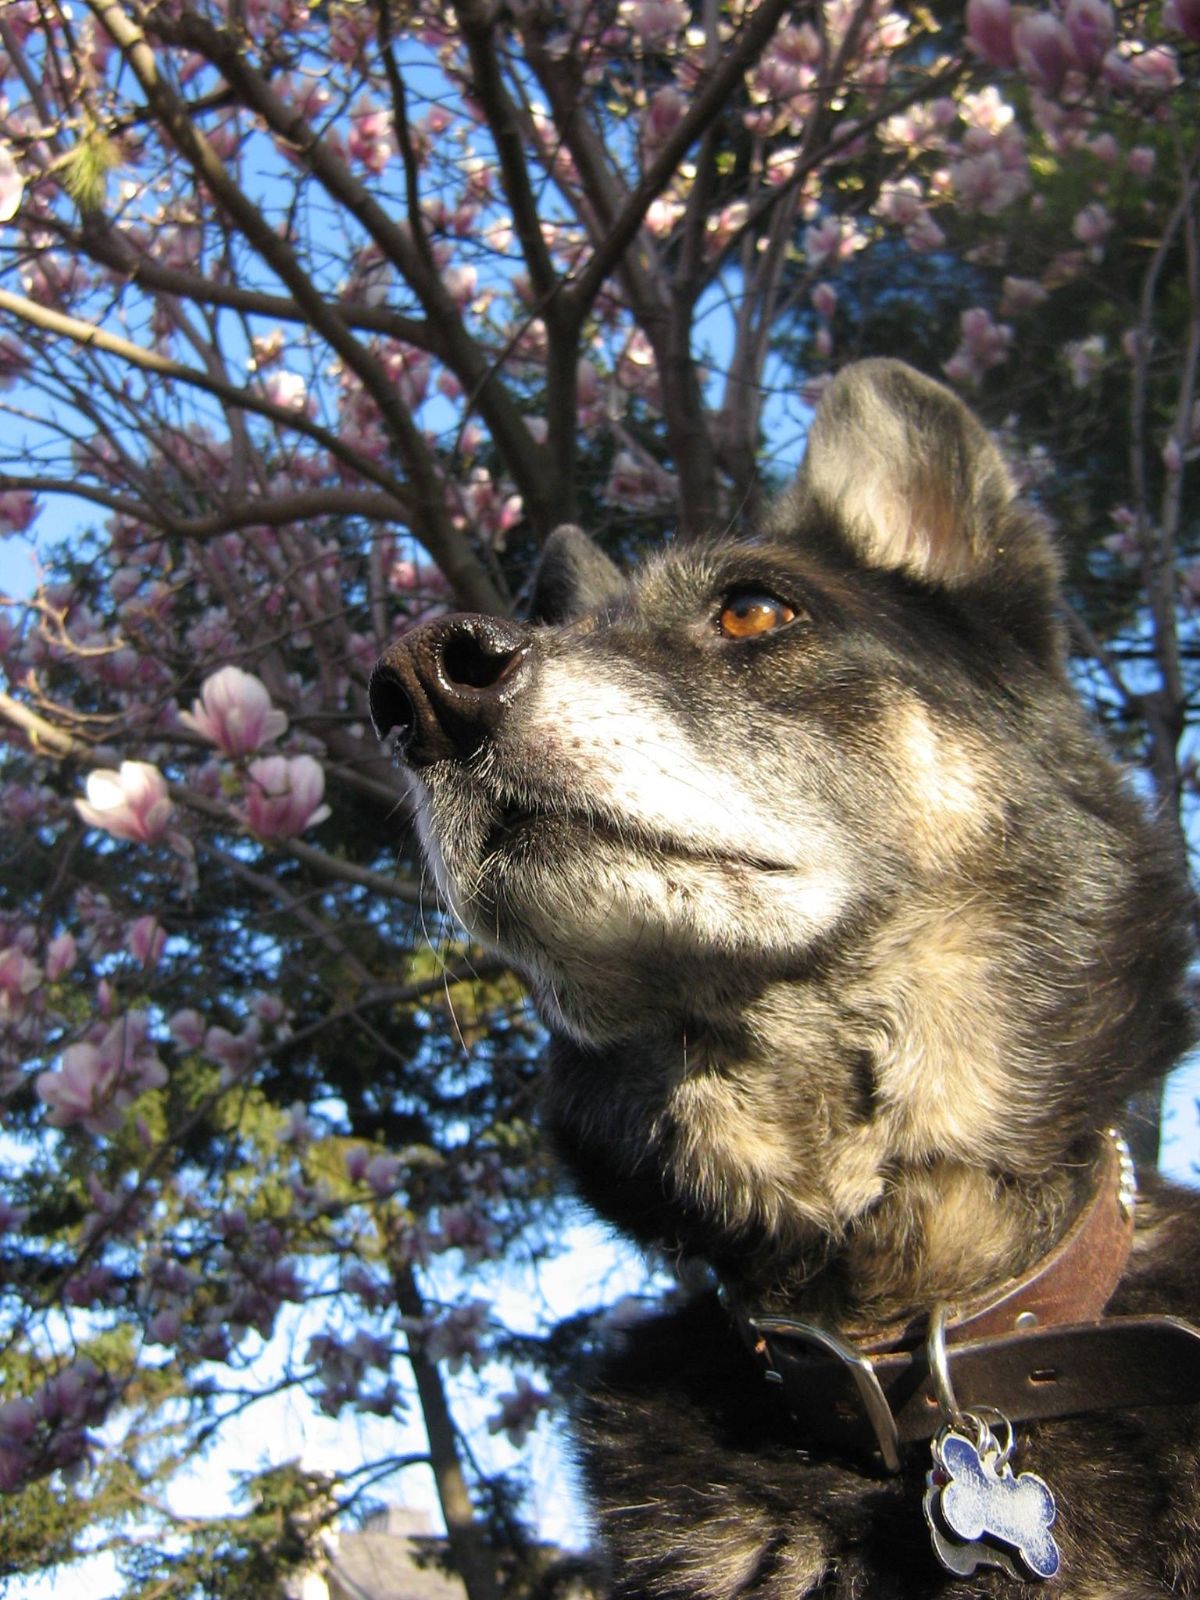 old black and white dog looking into the distance with photo taken from below showing a pink flower tree over the dog